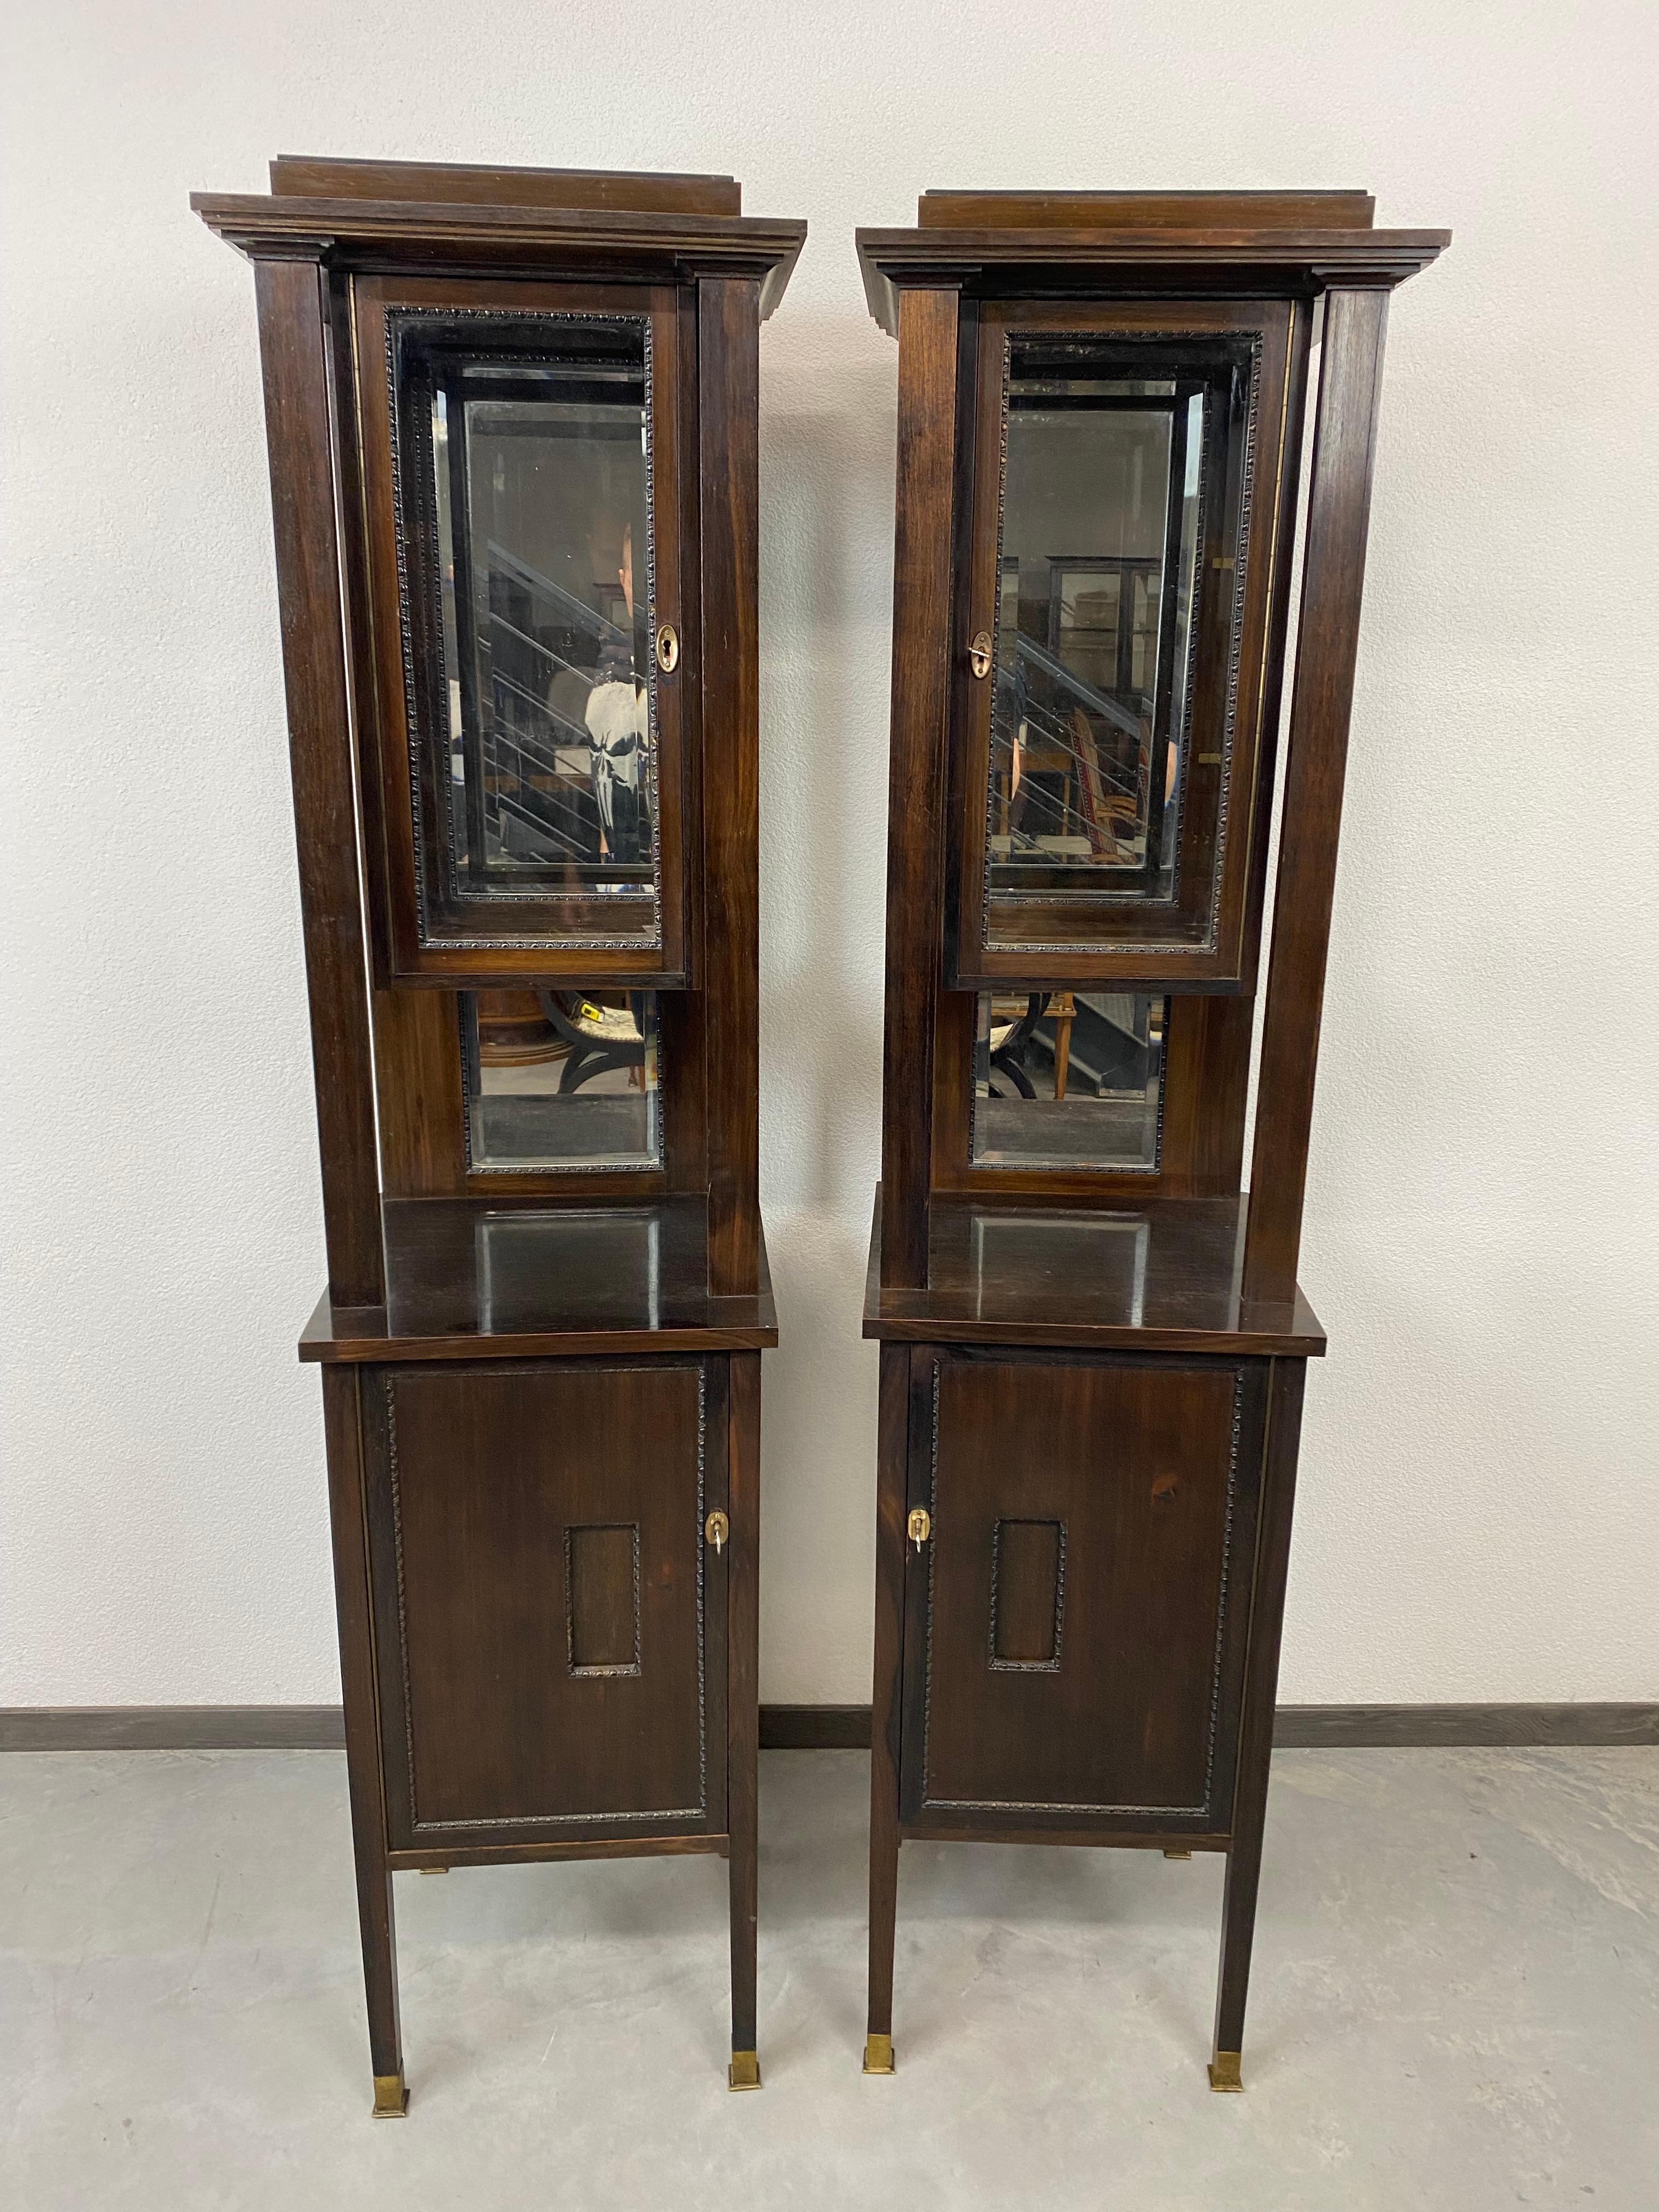 Pair of jugendstil vitrines in style of Adolf Loos in original condition with slight signs of usage. Brass leg endings.